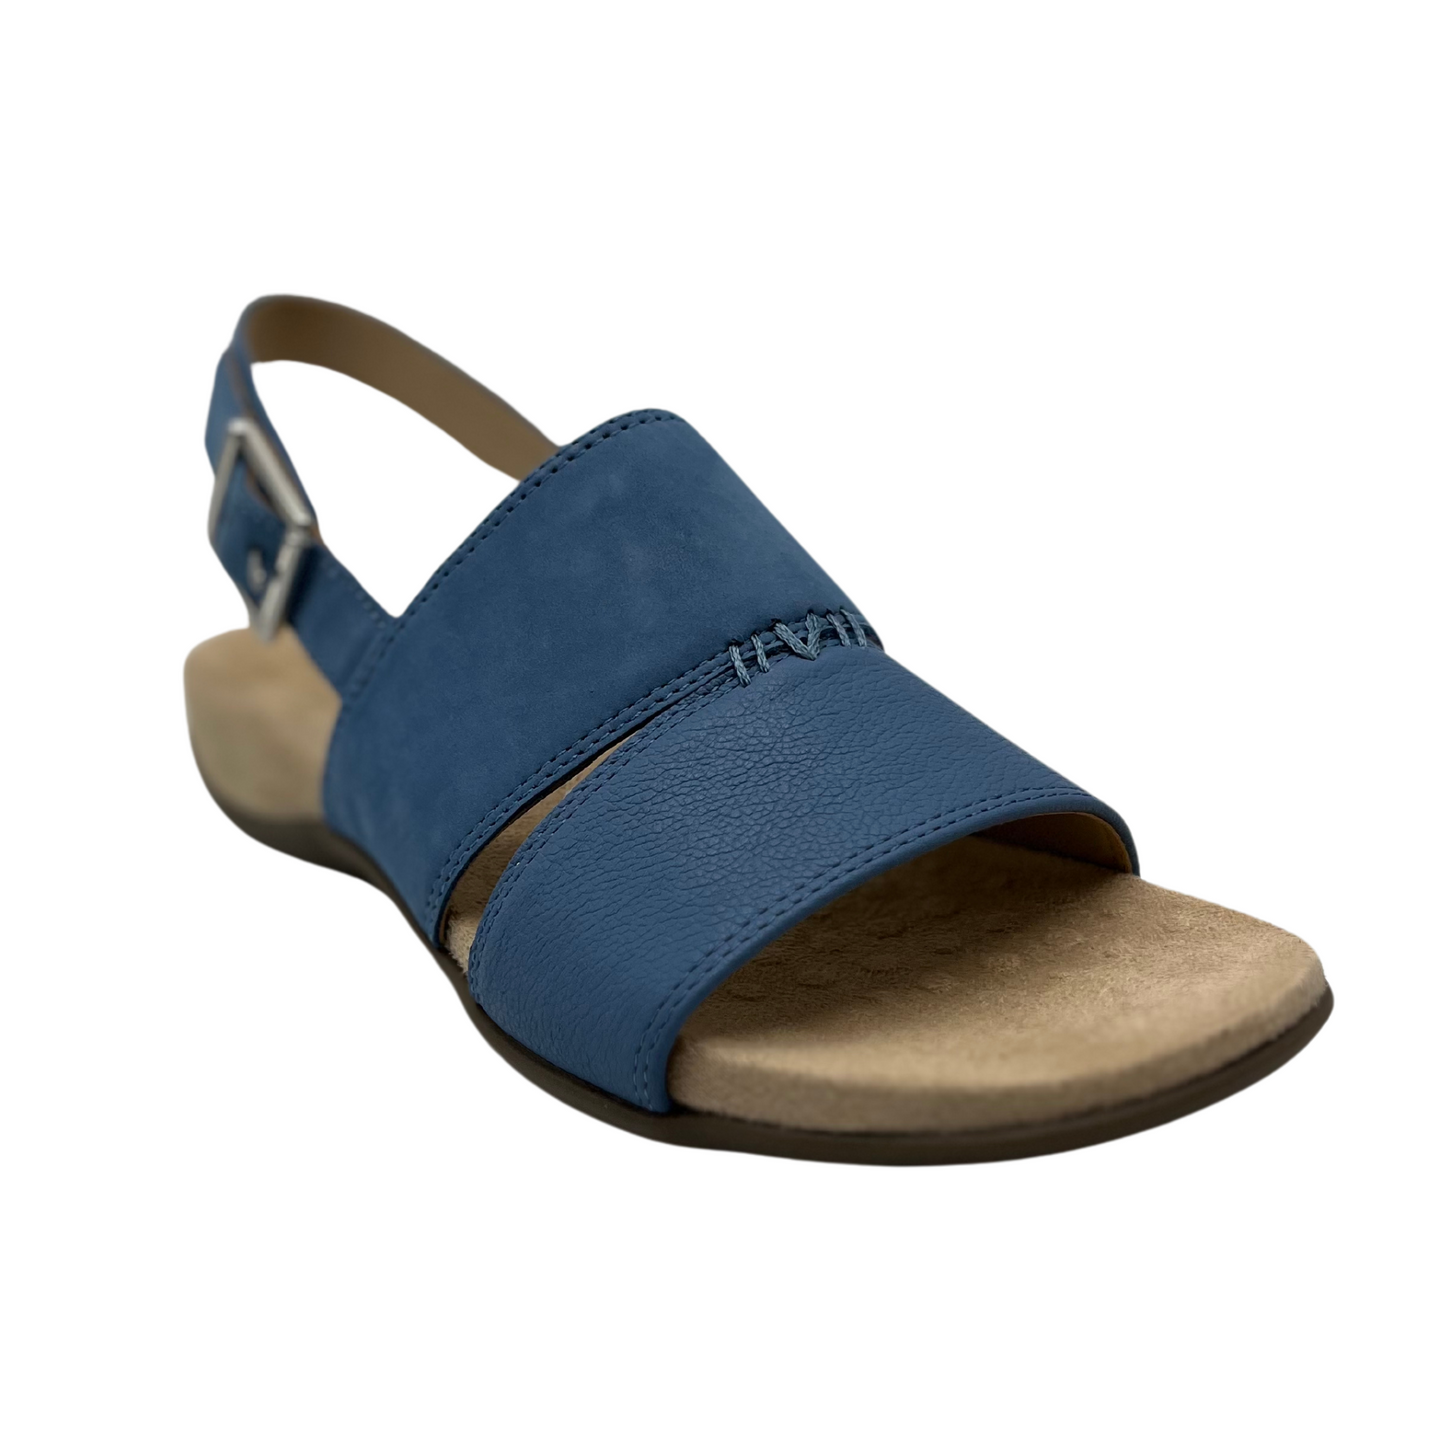 45 degree angled view of blue nubuck sandal with tan lining with sling back strap